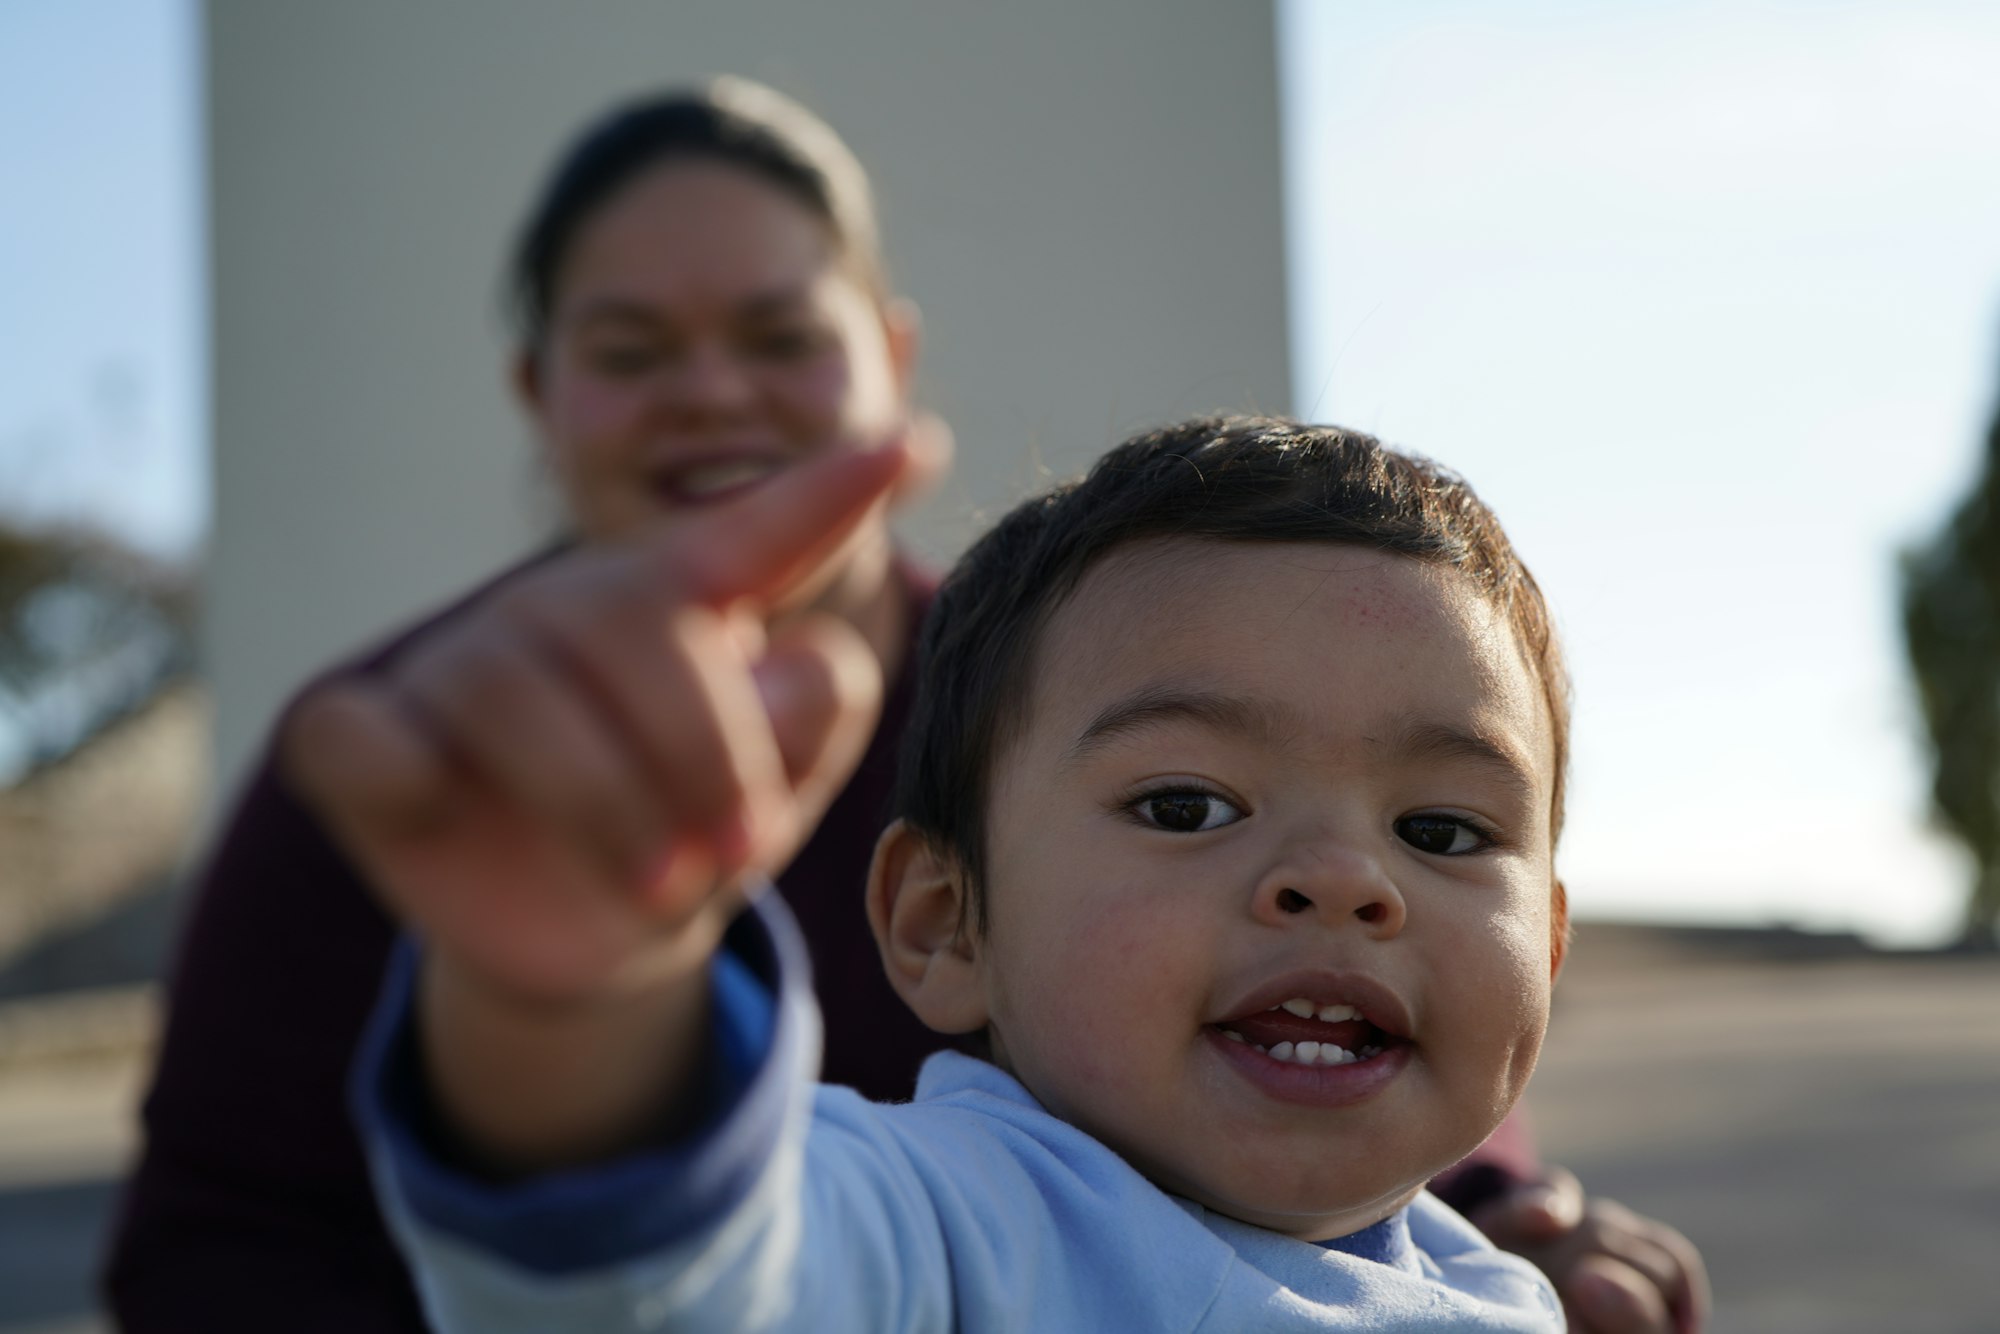 A baby points and smiles at the camera, while his mother looks on from the background.